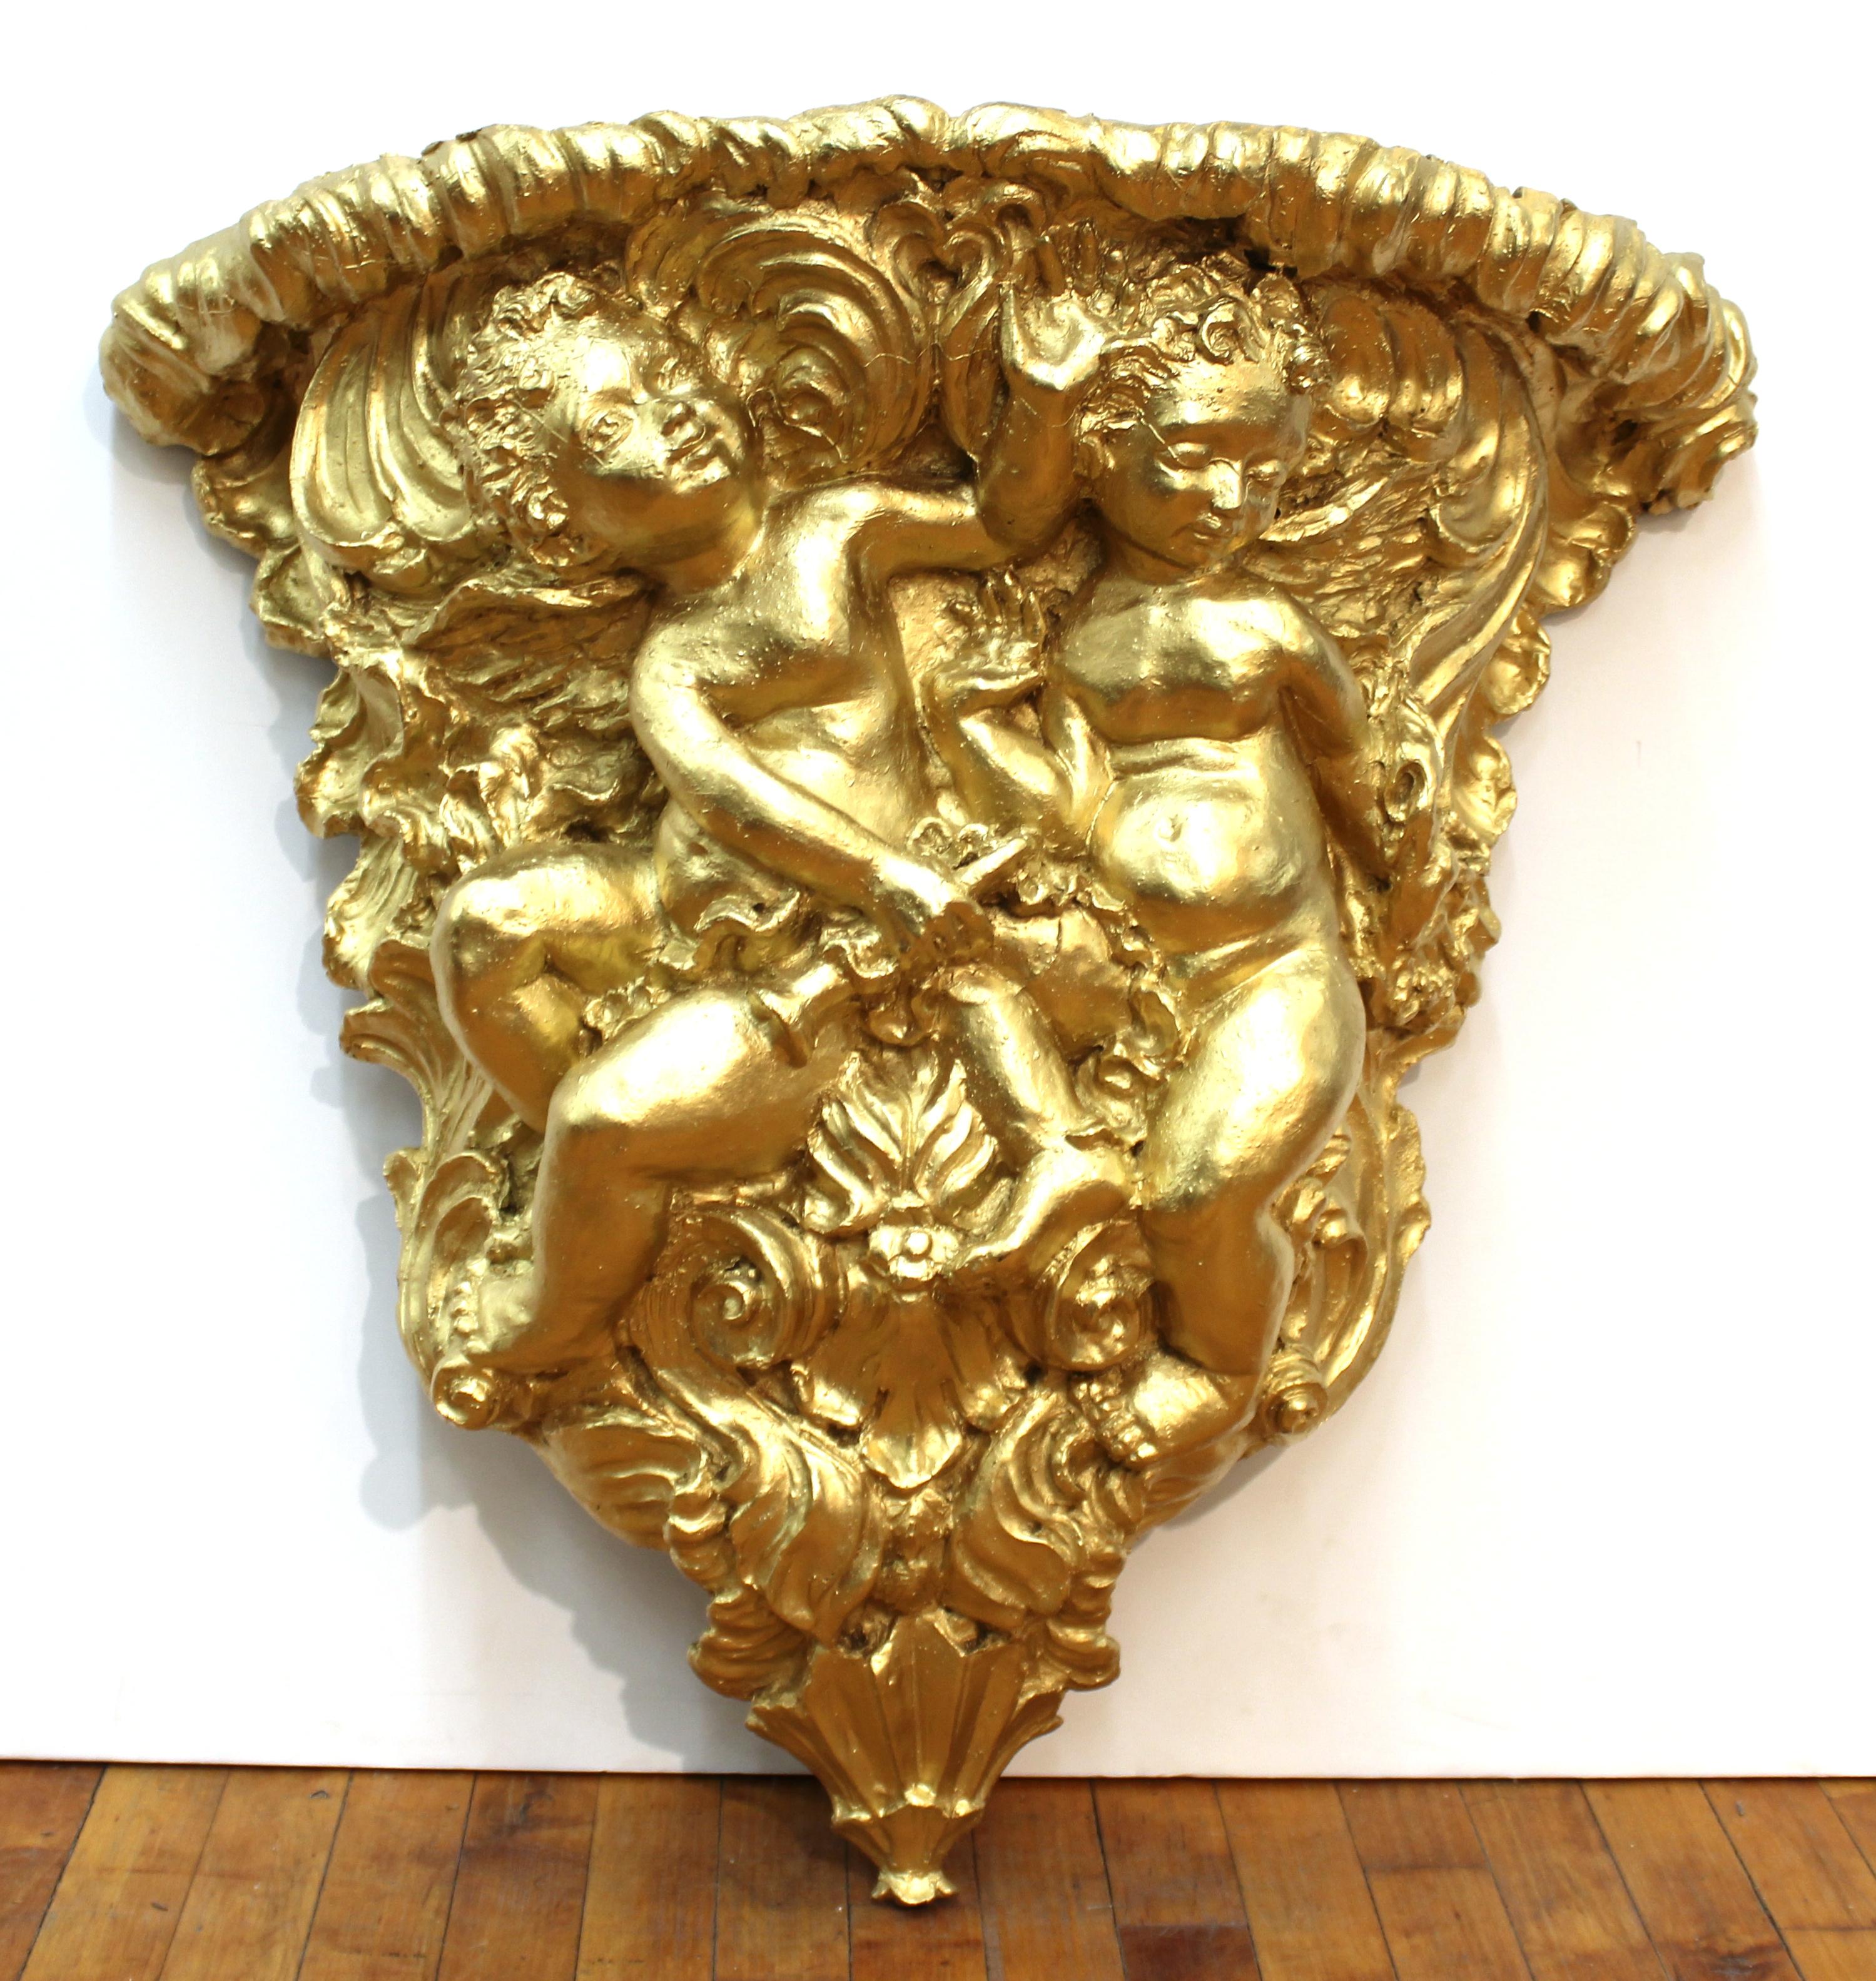 Baroque or Rococo Revival style gilt large wall bracket with frolicking putti, molded in resin.